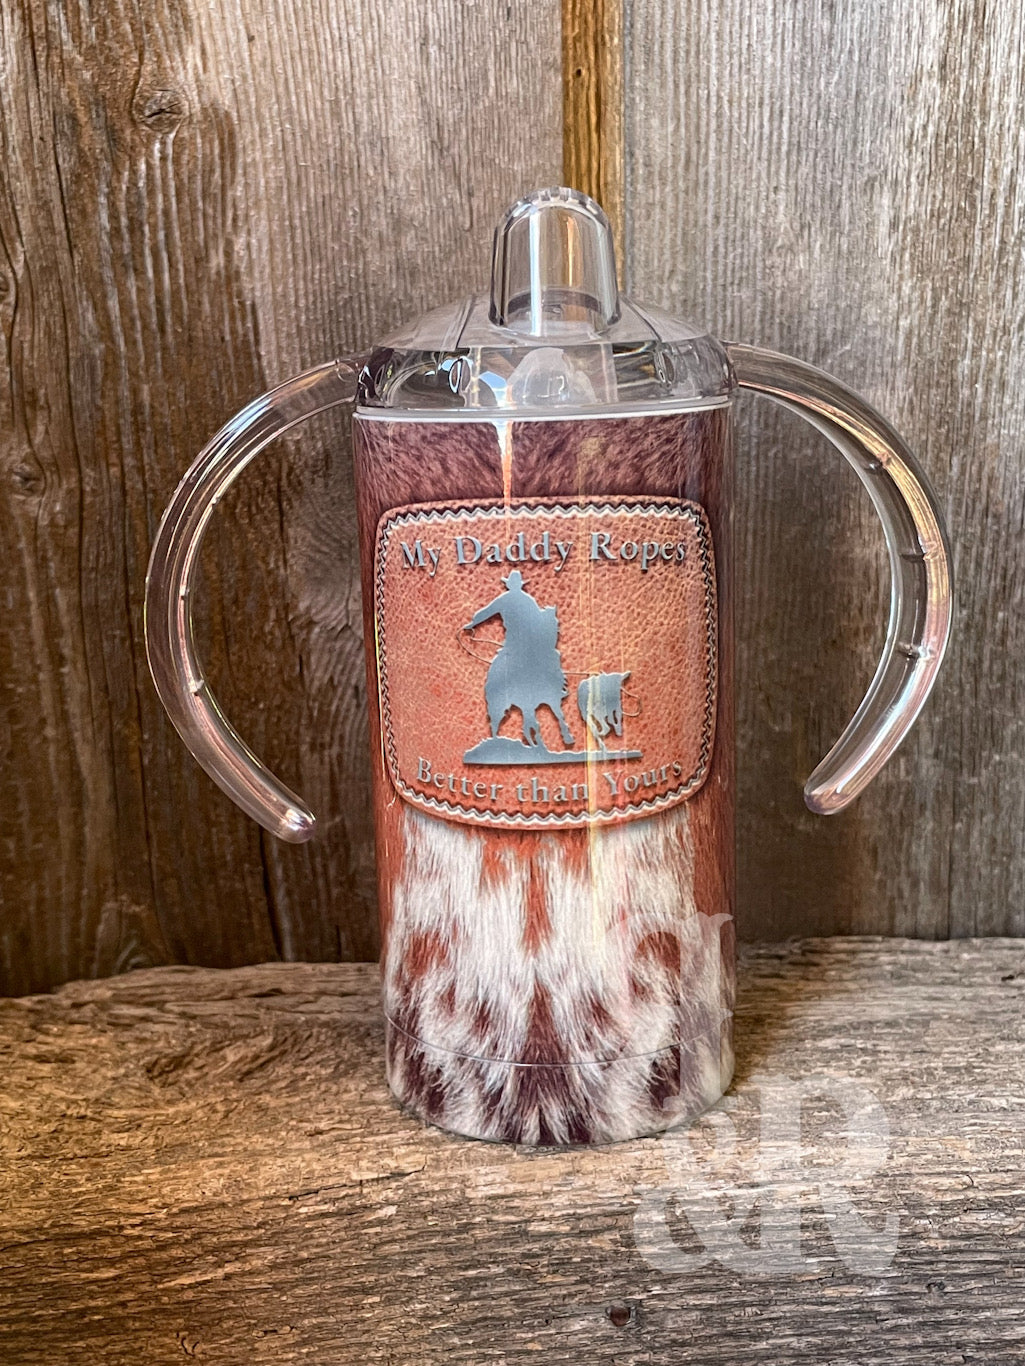 The Whole Herd Toddler Sippy Cup Tumbler Make it Count K3020-11 – Painted  Cowgirl Western Store